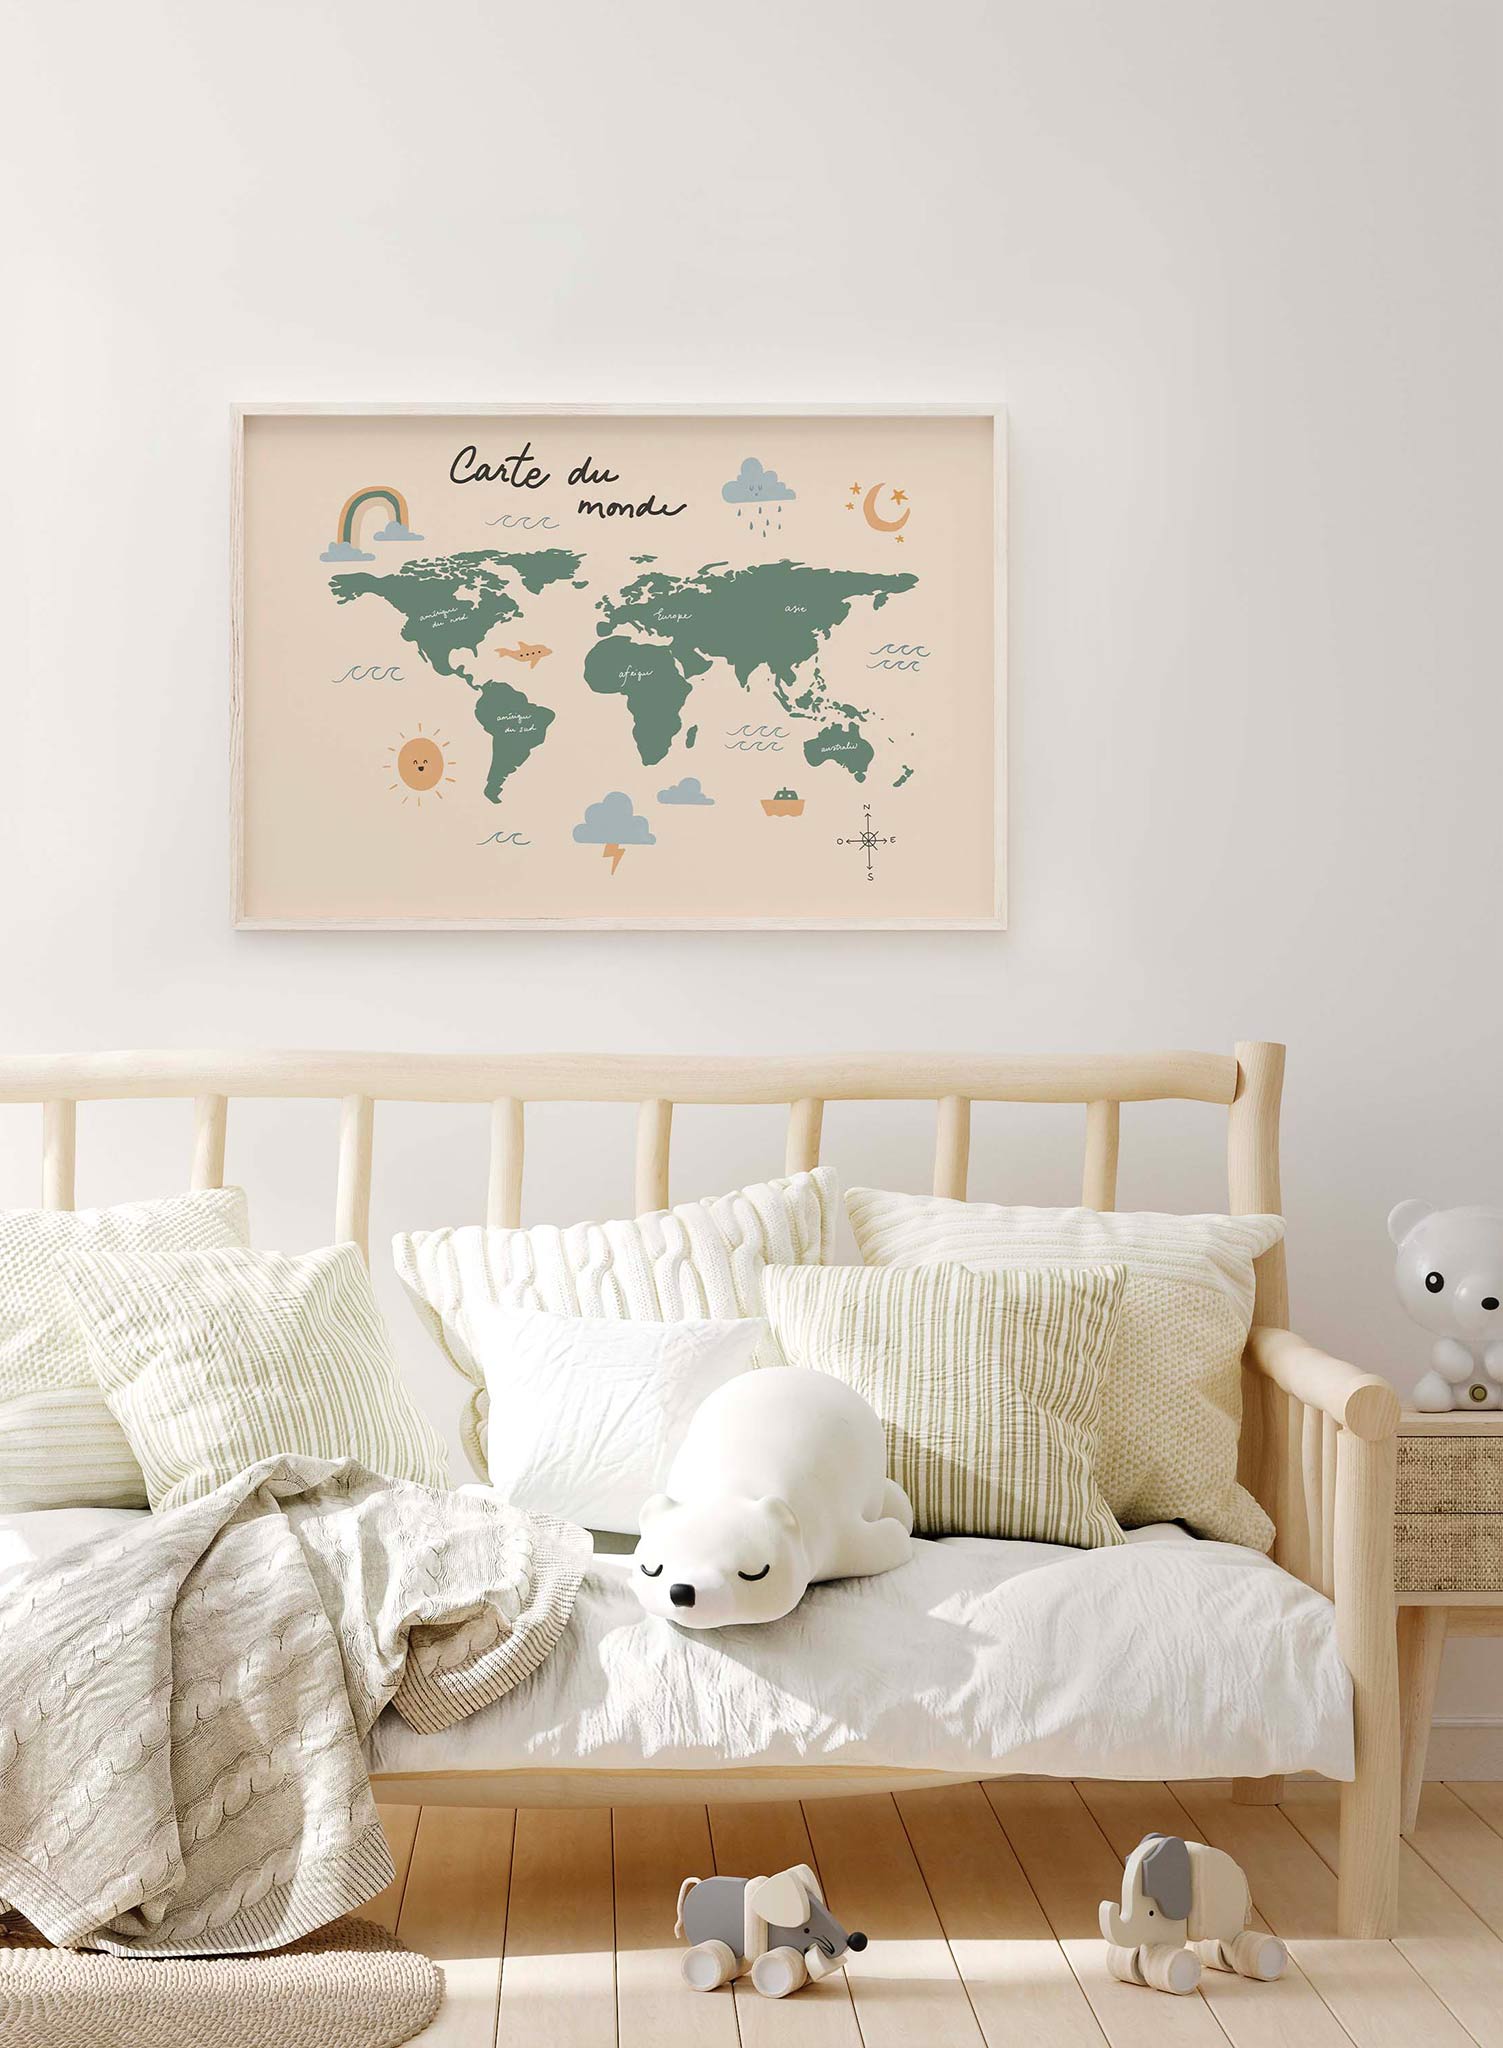 Globe Trotter in French is a minimalist illustration by Opposite Wall of a simpler world map depicting the five continents in French accompanied by different weather patterns.